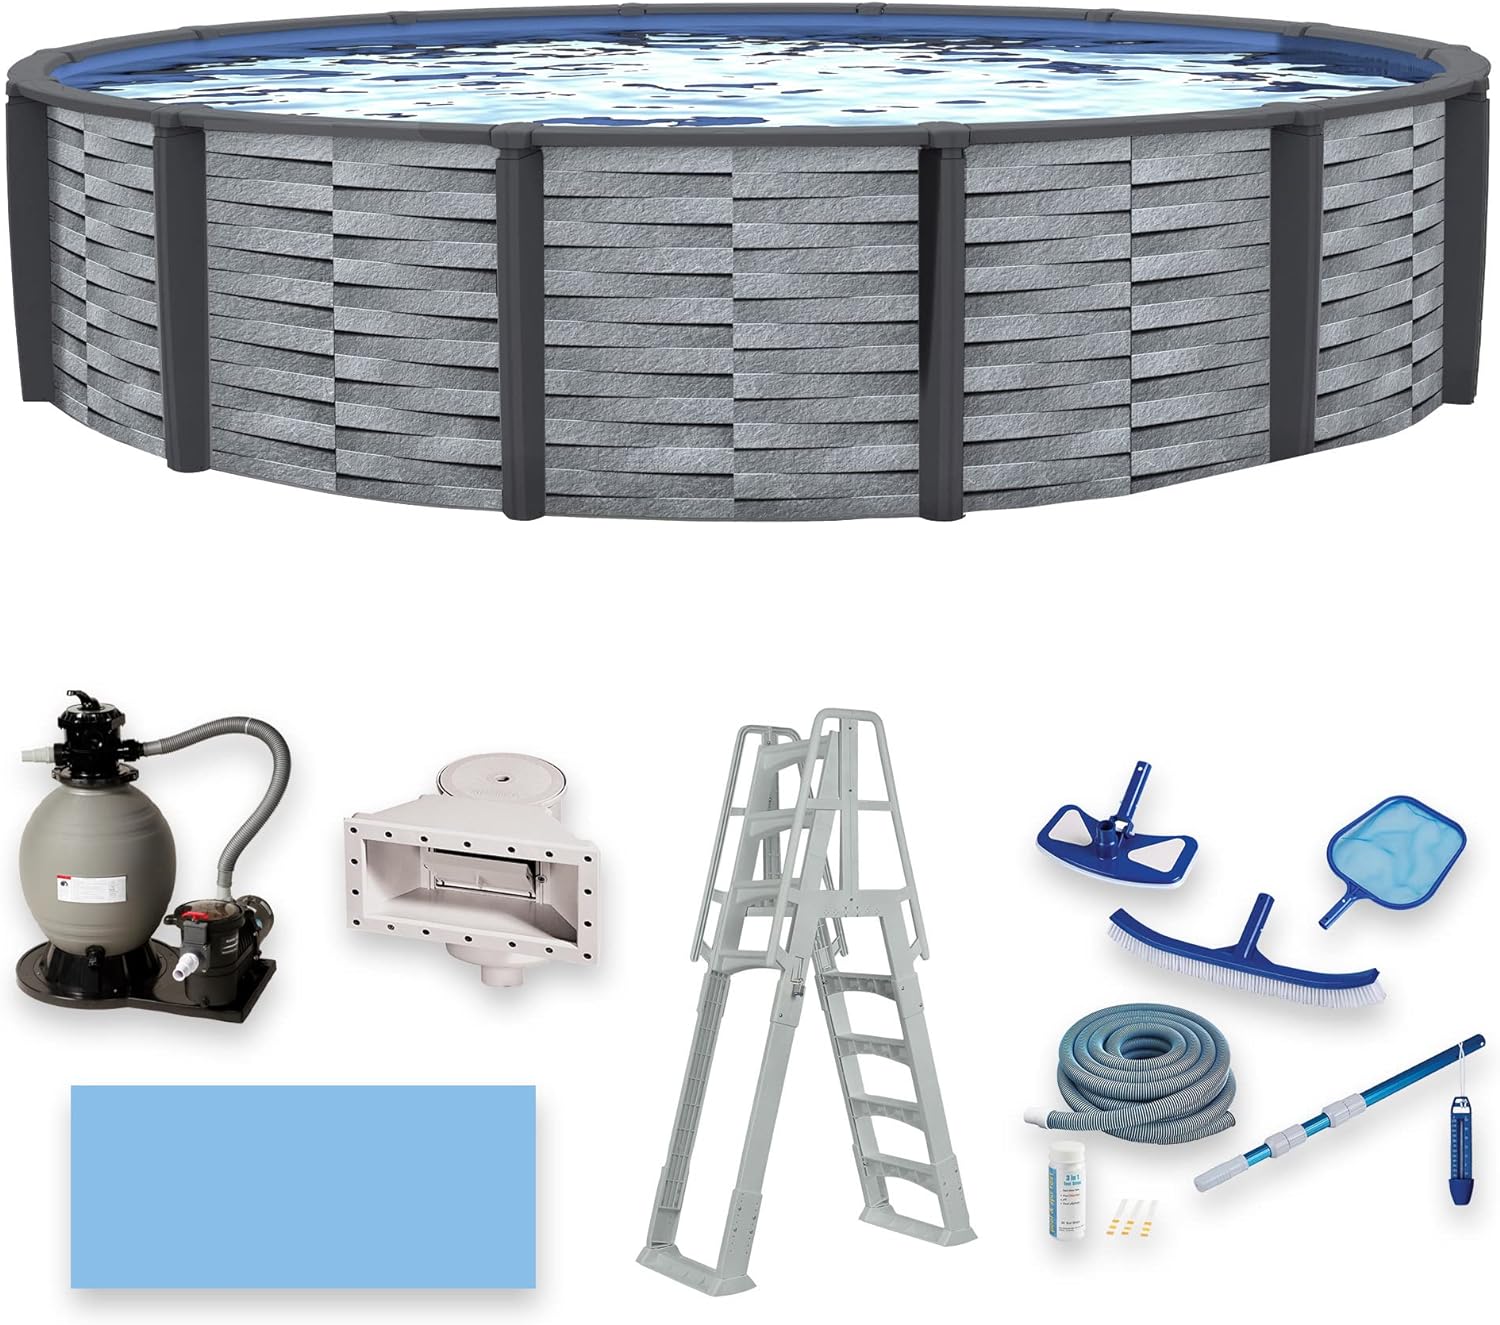 Affinity 30' Round 52" Deep 7" Top Rail Resin Above Ground Swimming Pool Package